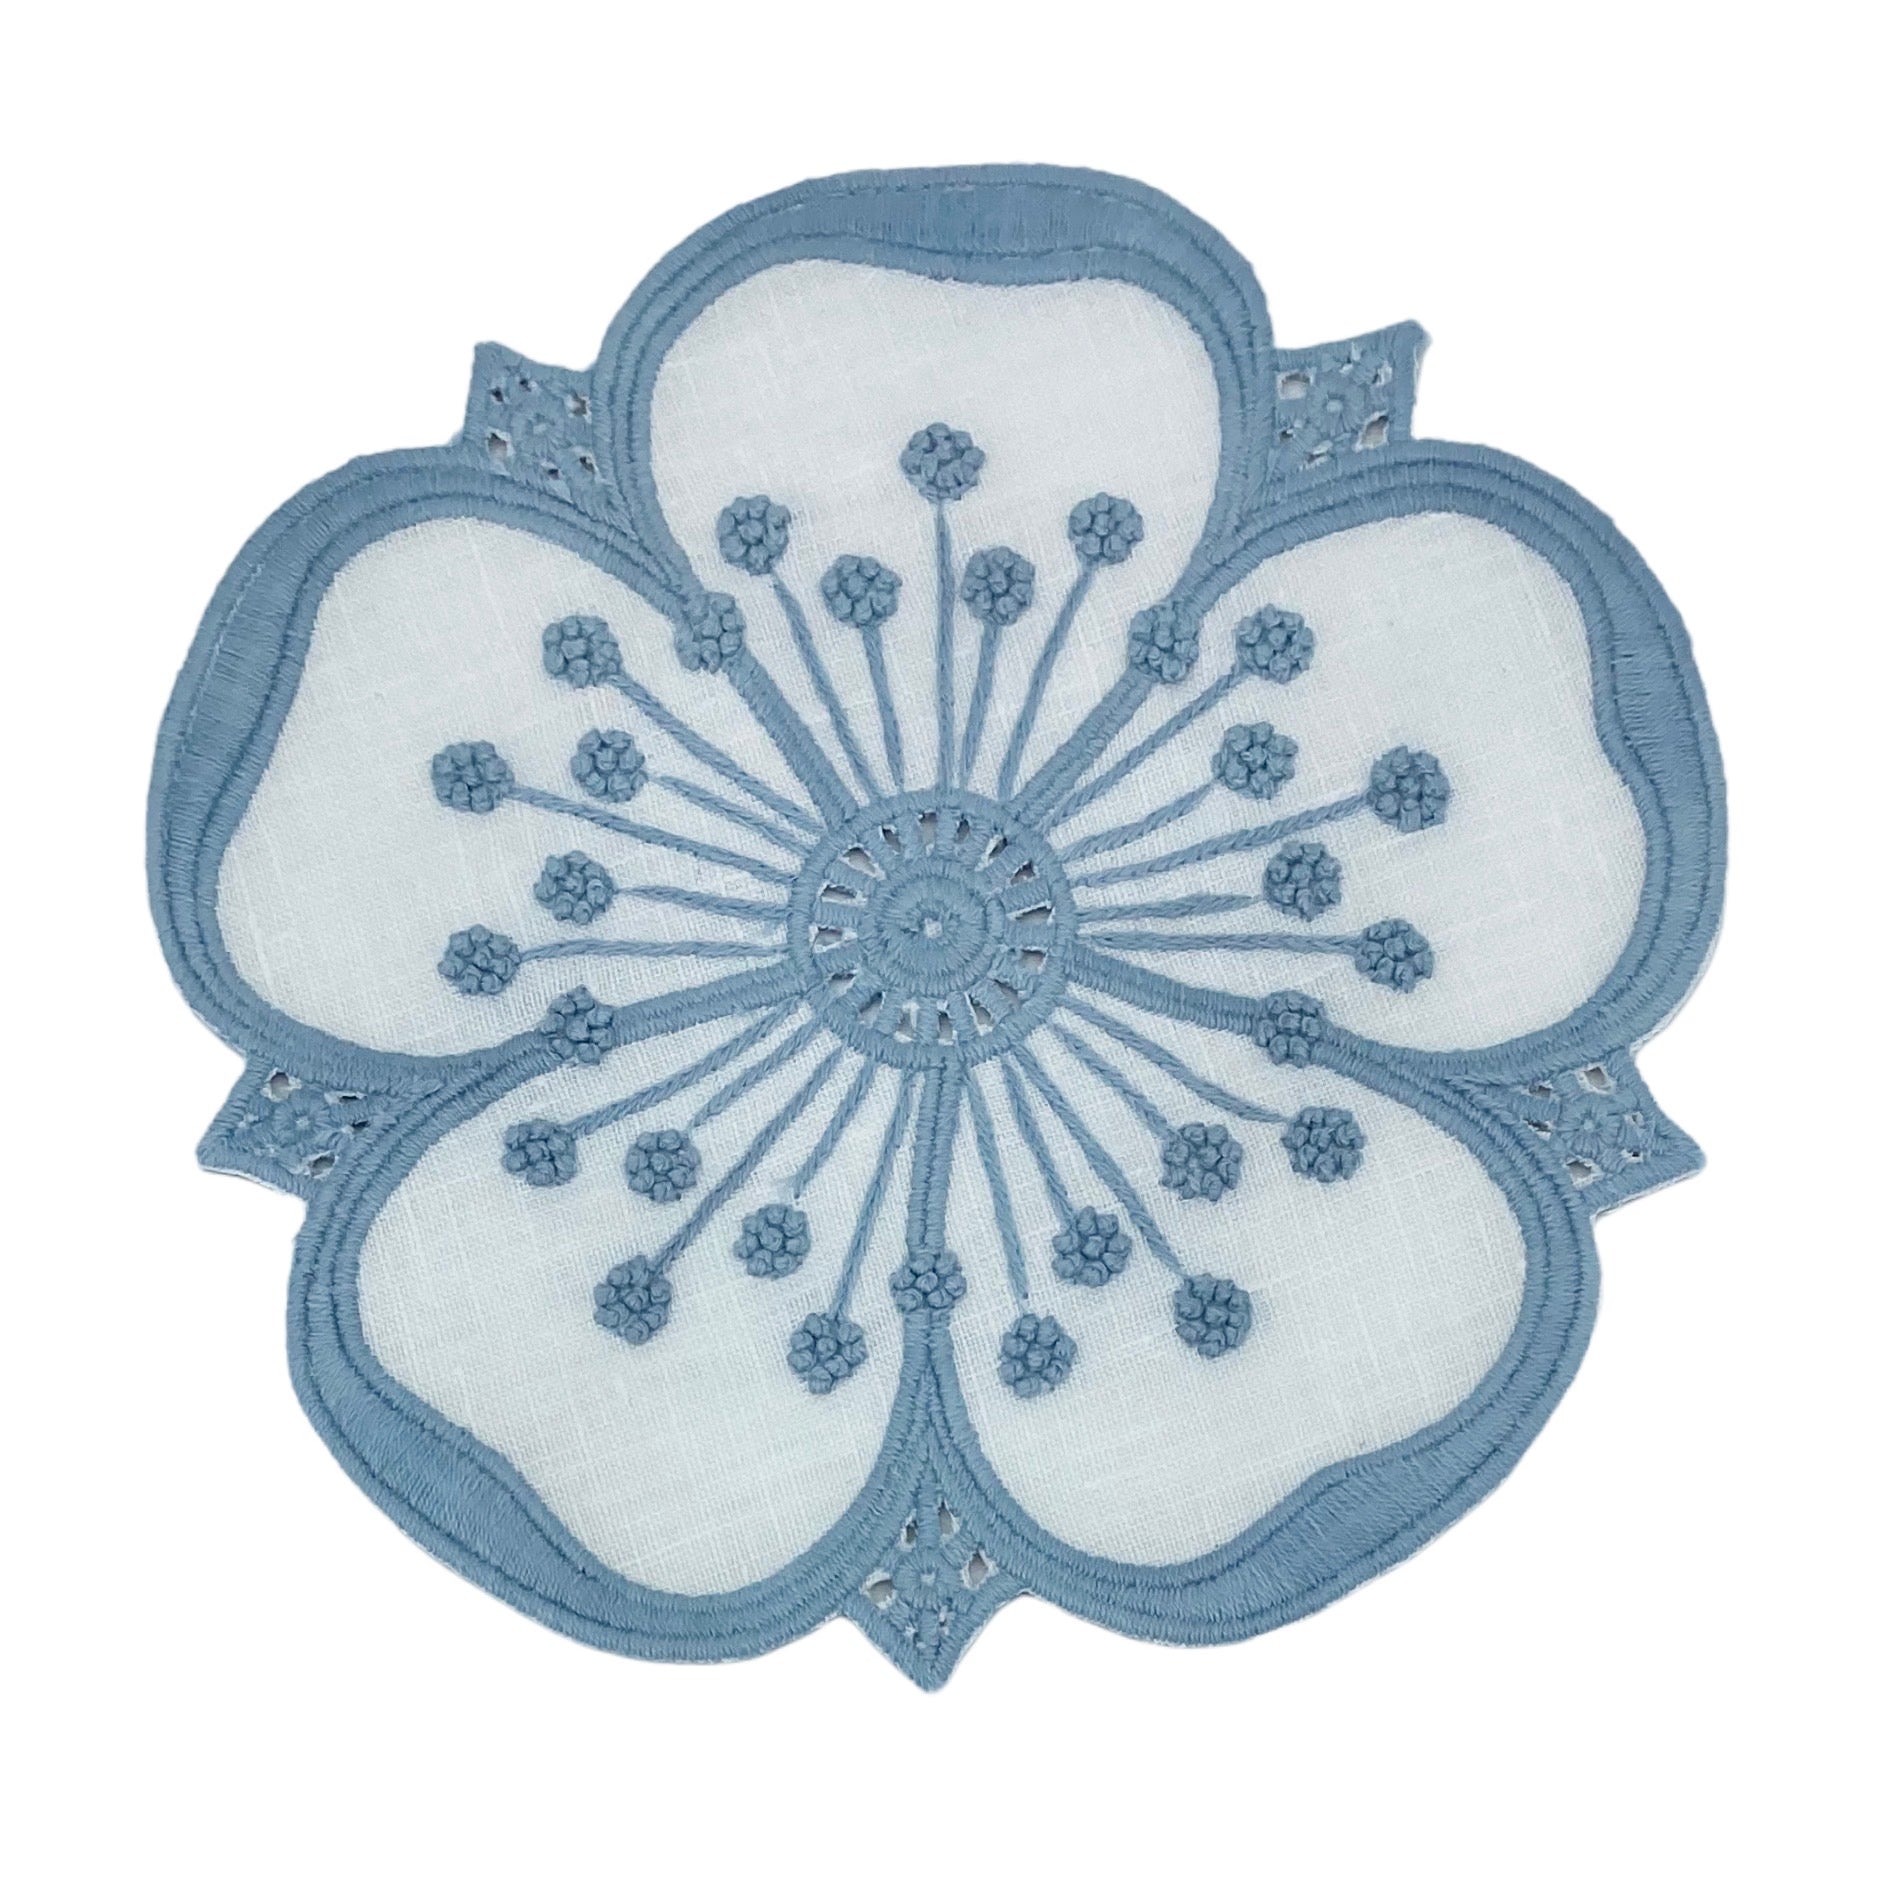 Embroidered Petal Coaster Set in Blue + White